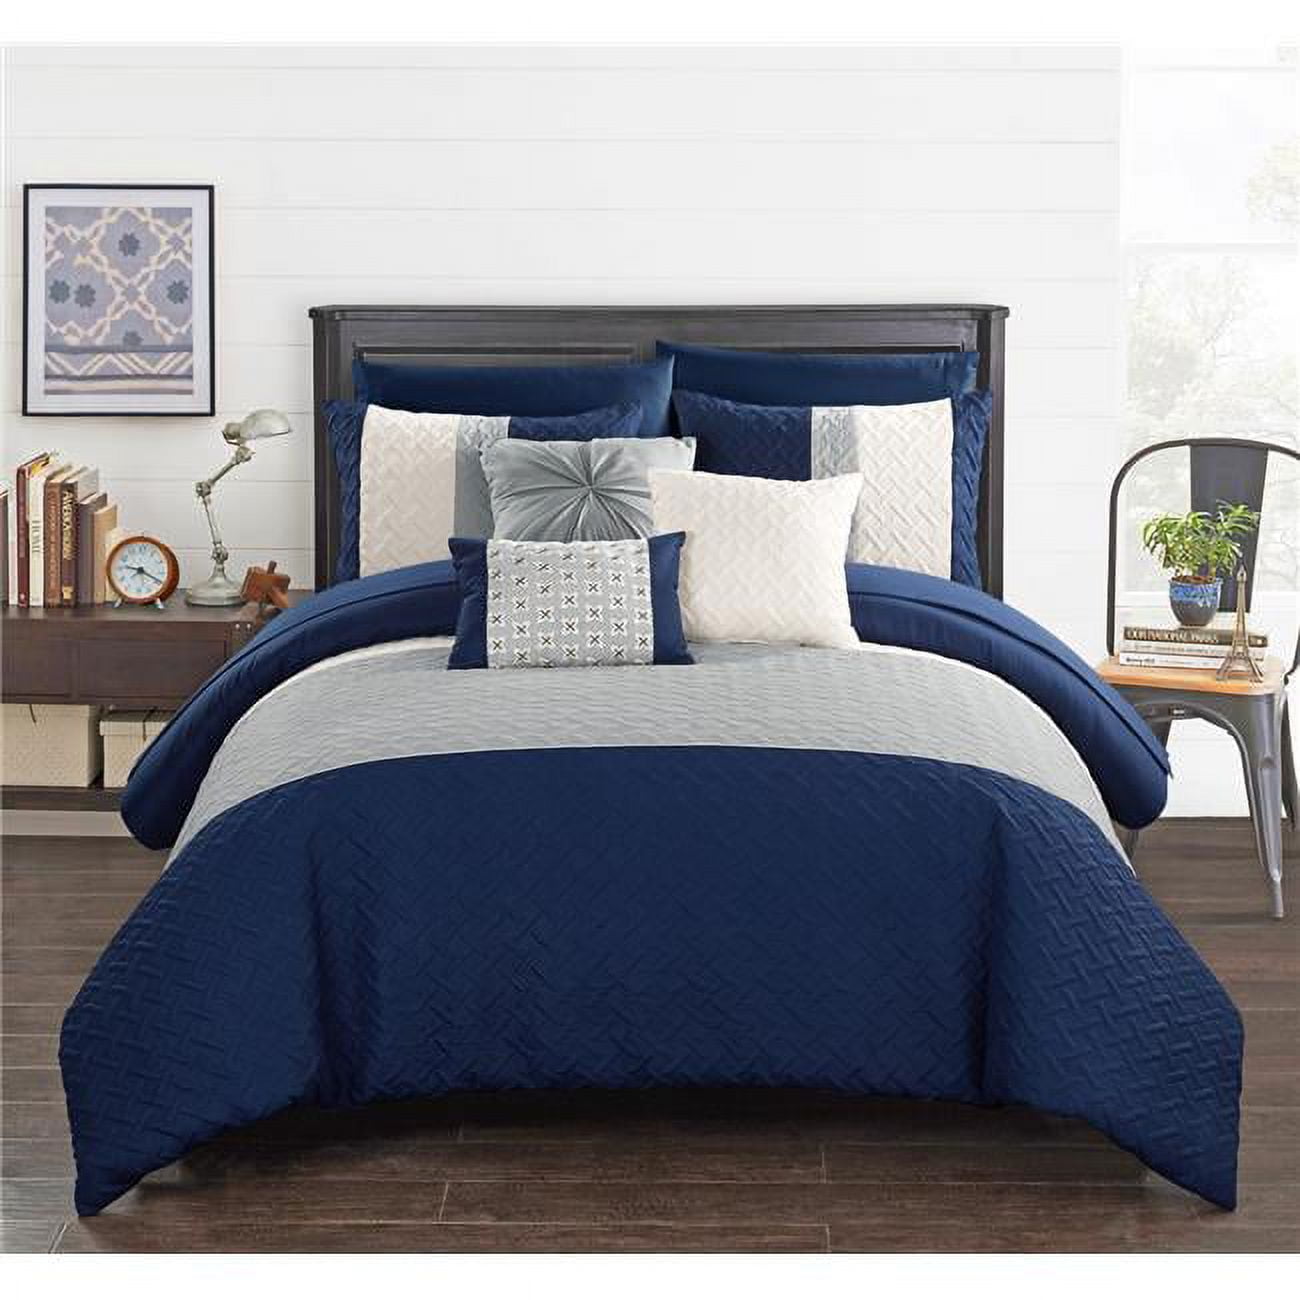 Bcs03560-us King Size Lior Comforter Set Color Block Quilted Embroidered Design Bed Sheets & Decorative Pillows, Navy - 10 Piece